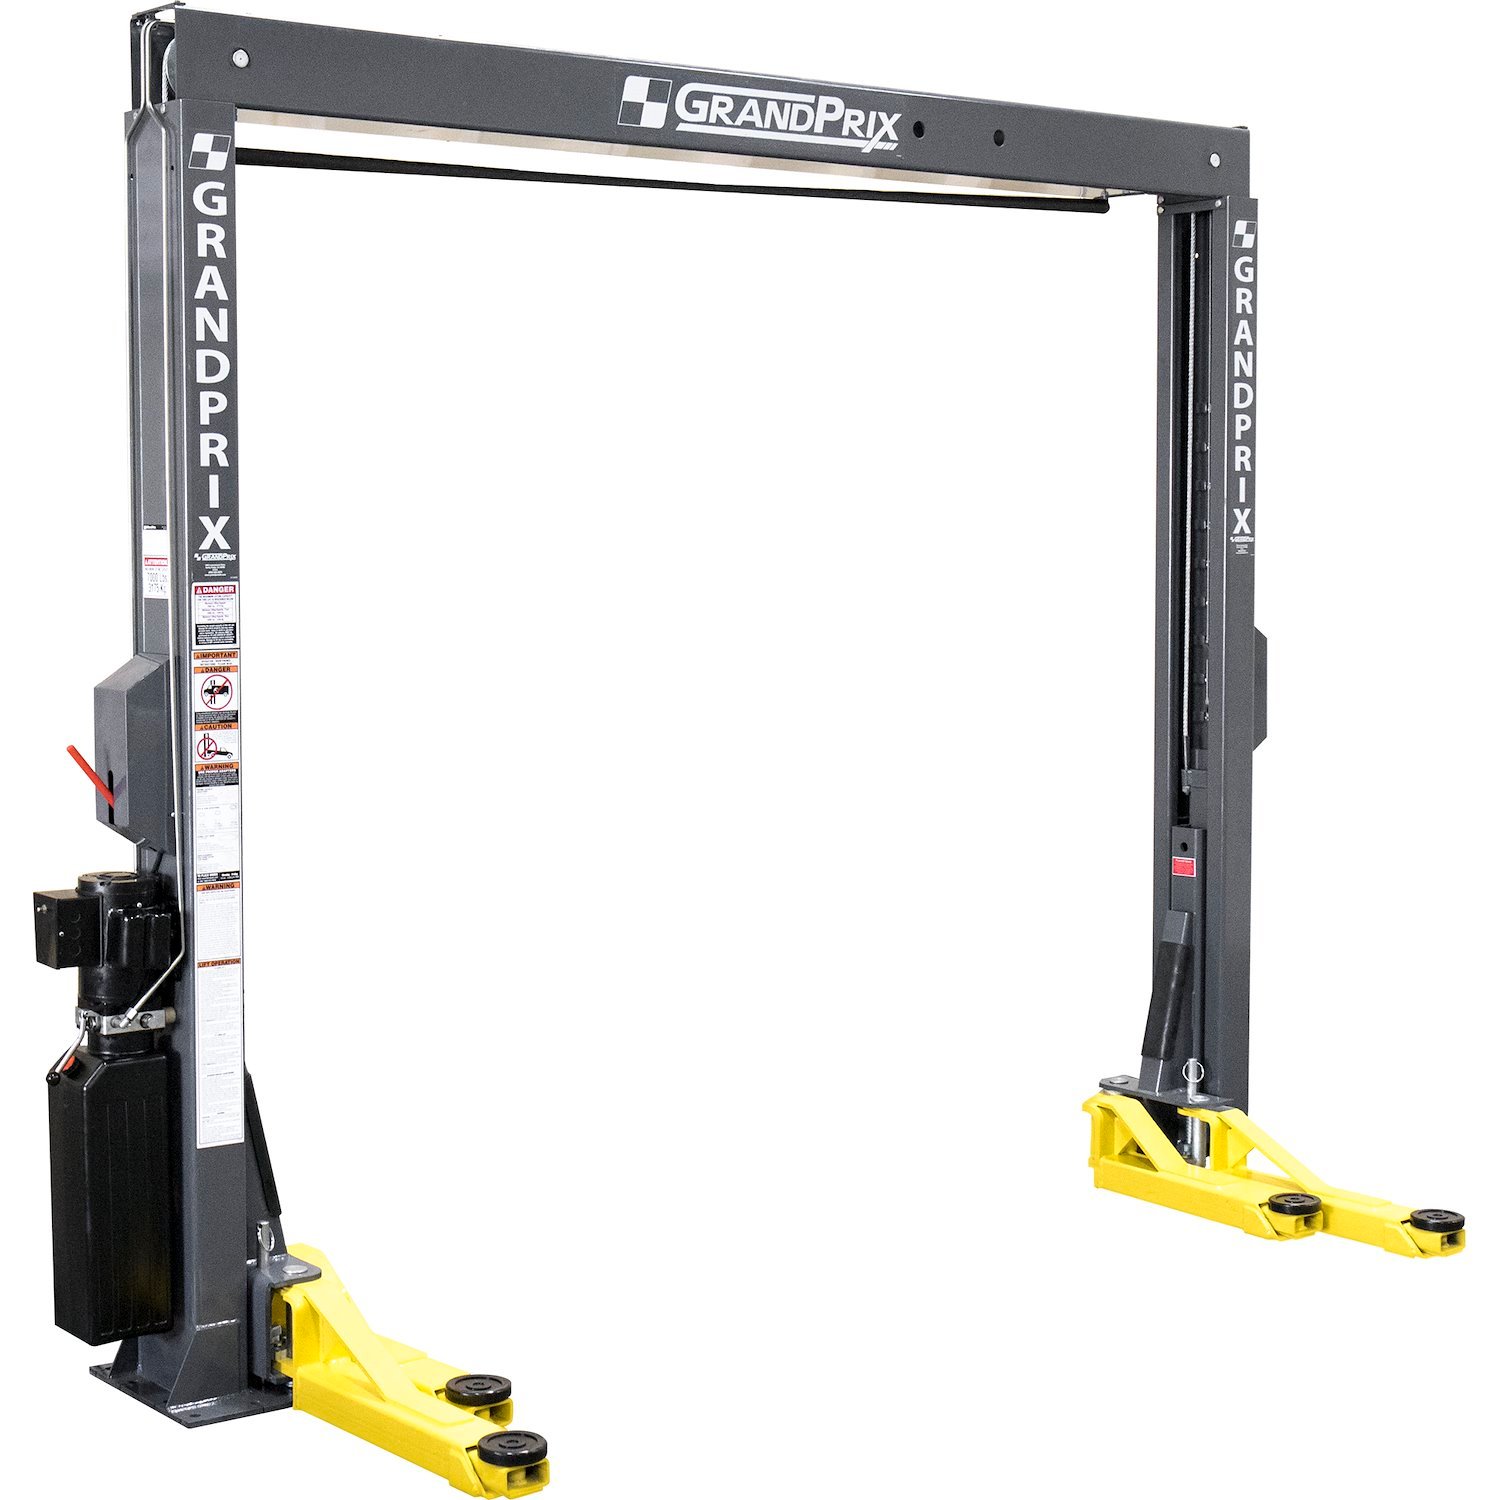 GrandPrix Two-Post Vehicle Lift, 7,000 lbs. Capacity, 58 in. Max Rise